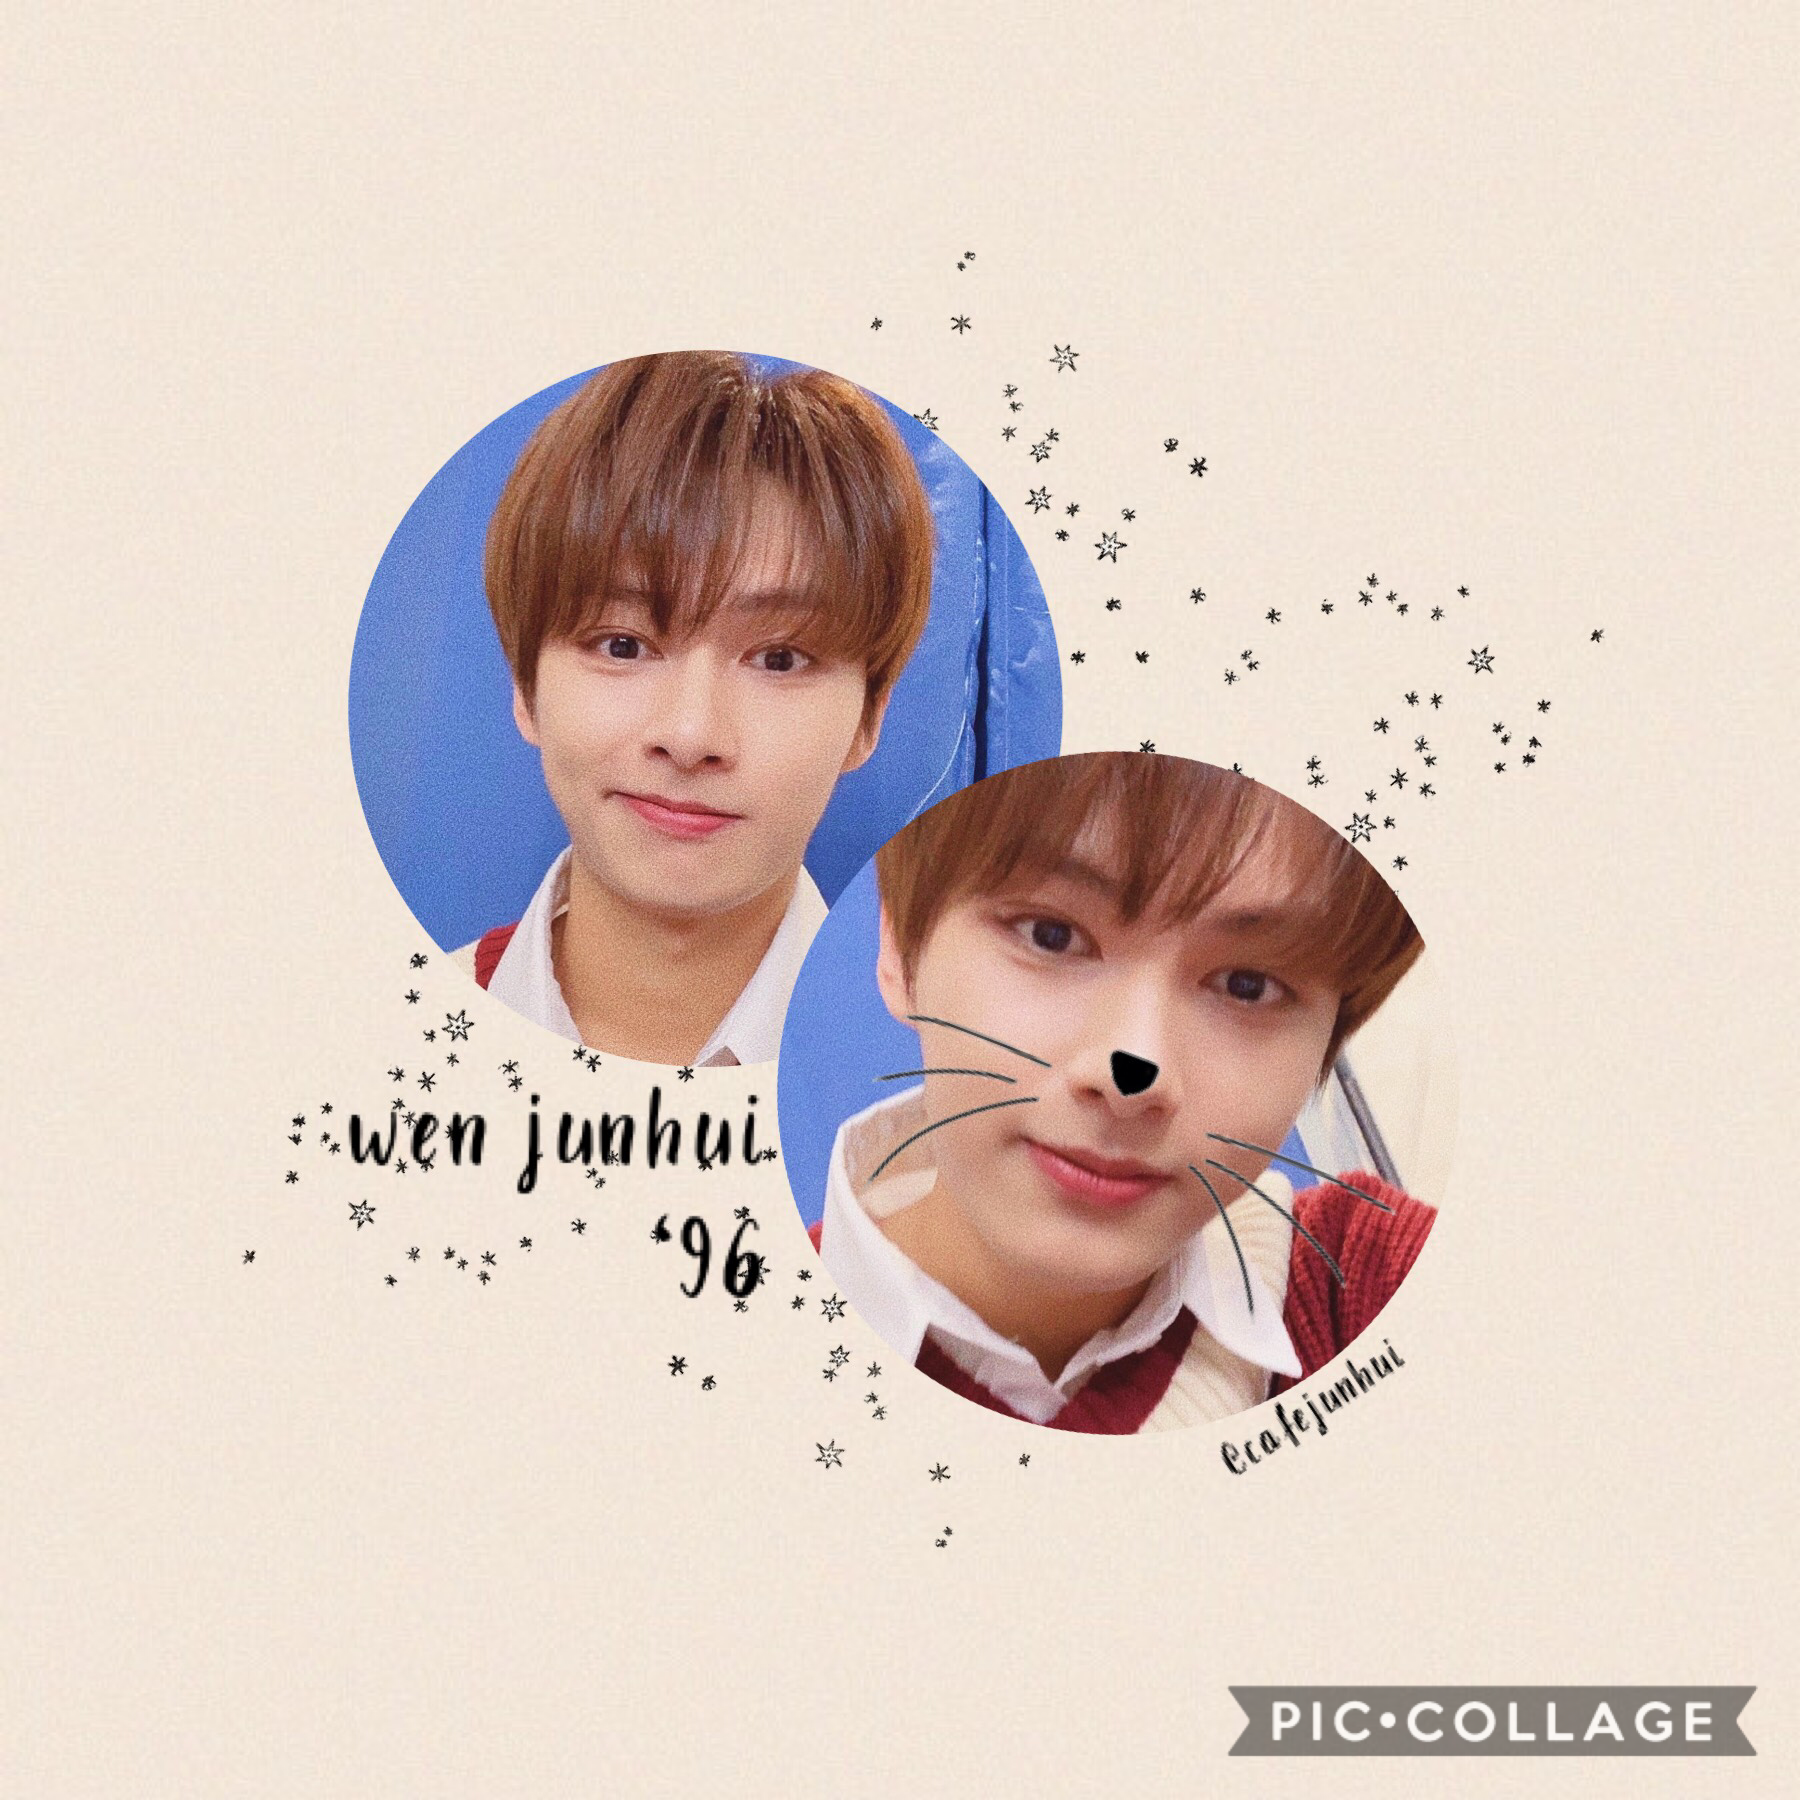 CLICK 🐱
sorry it took so long for me to start my new theme! also if you havent noticed, junhui has become ultimate bias and i love him more than i can say uwu ✨💗 tomorrow is my 100 days with him i’ll hopefully post an edit!